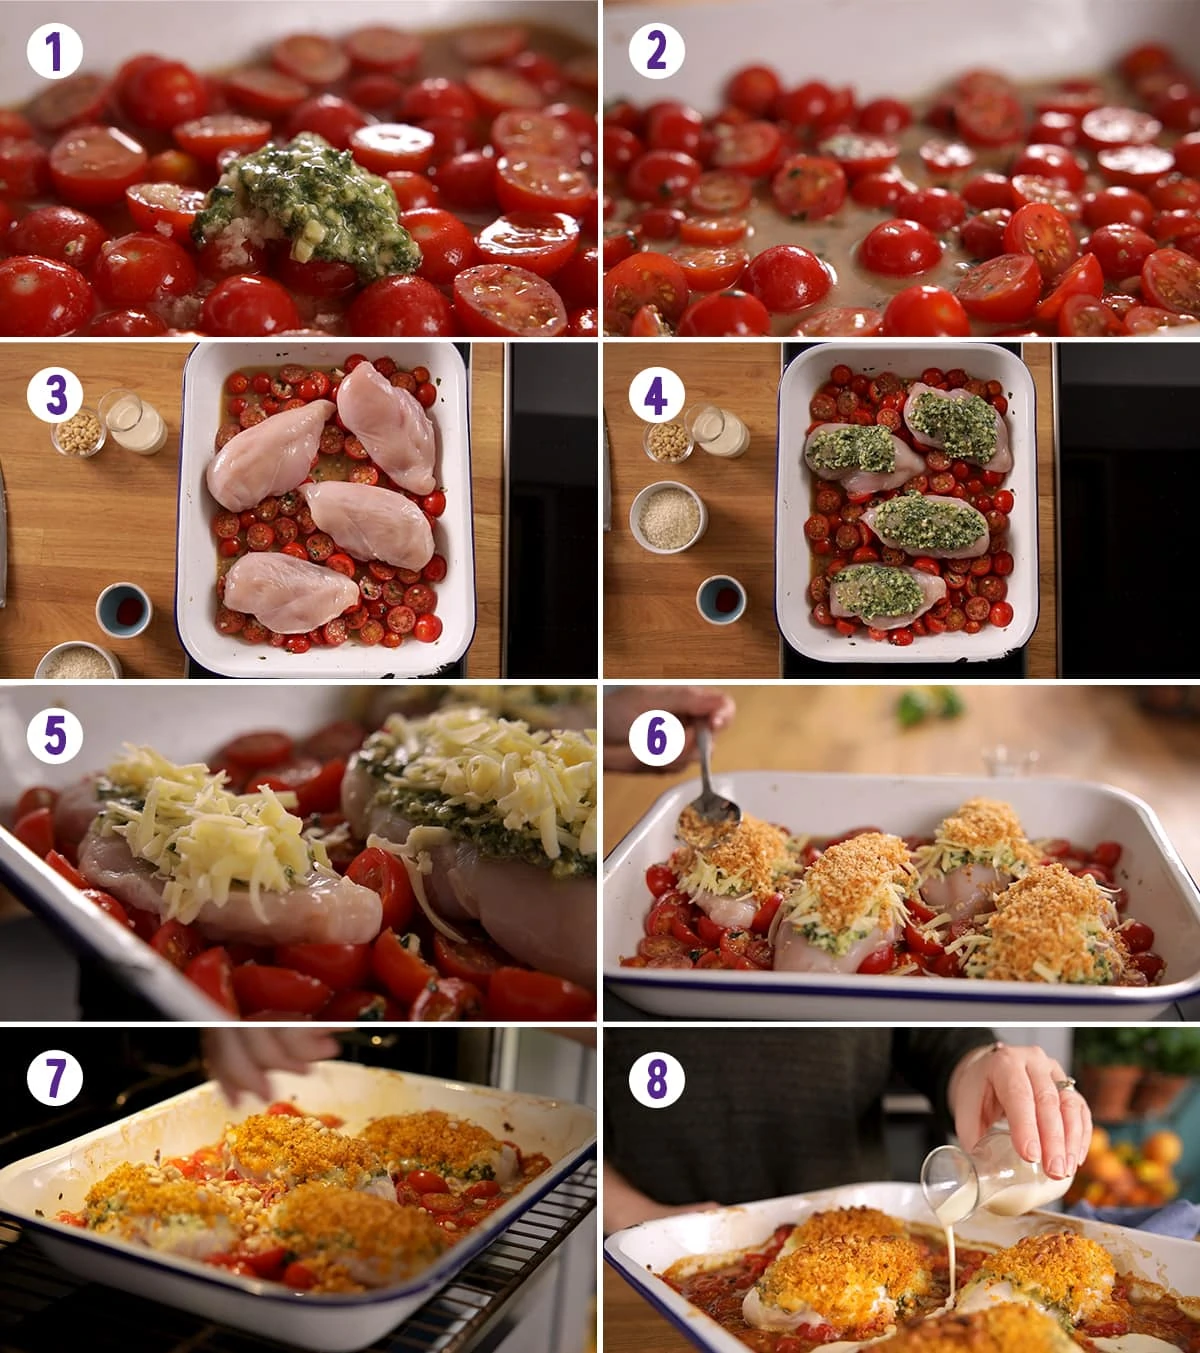 8 image collage showing how to make baked pesto chicken